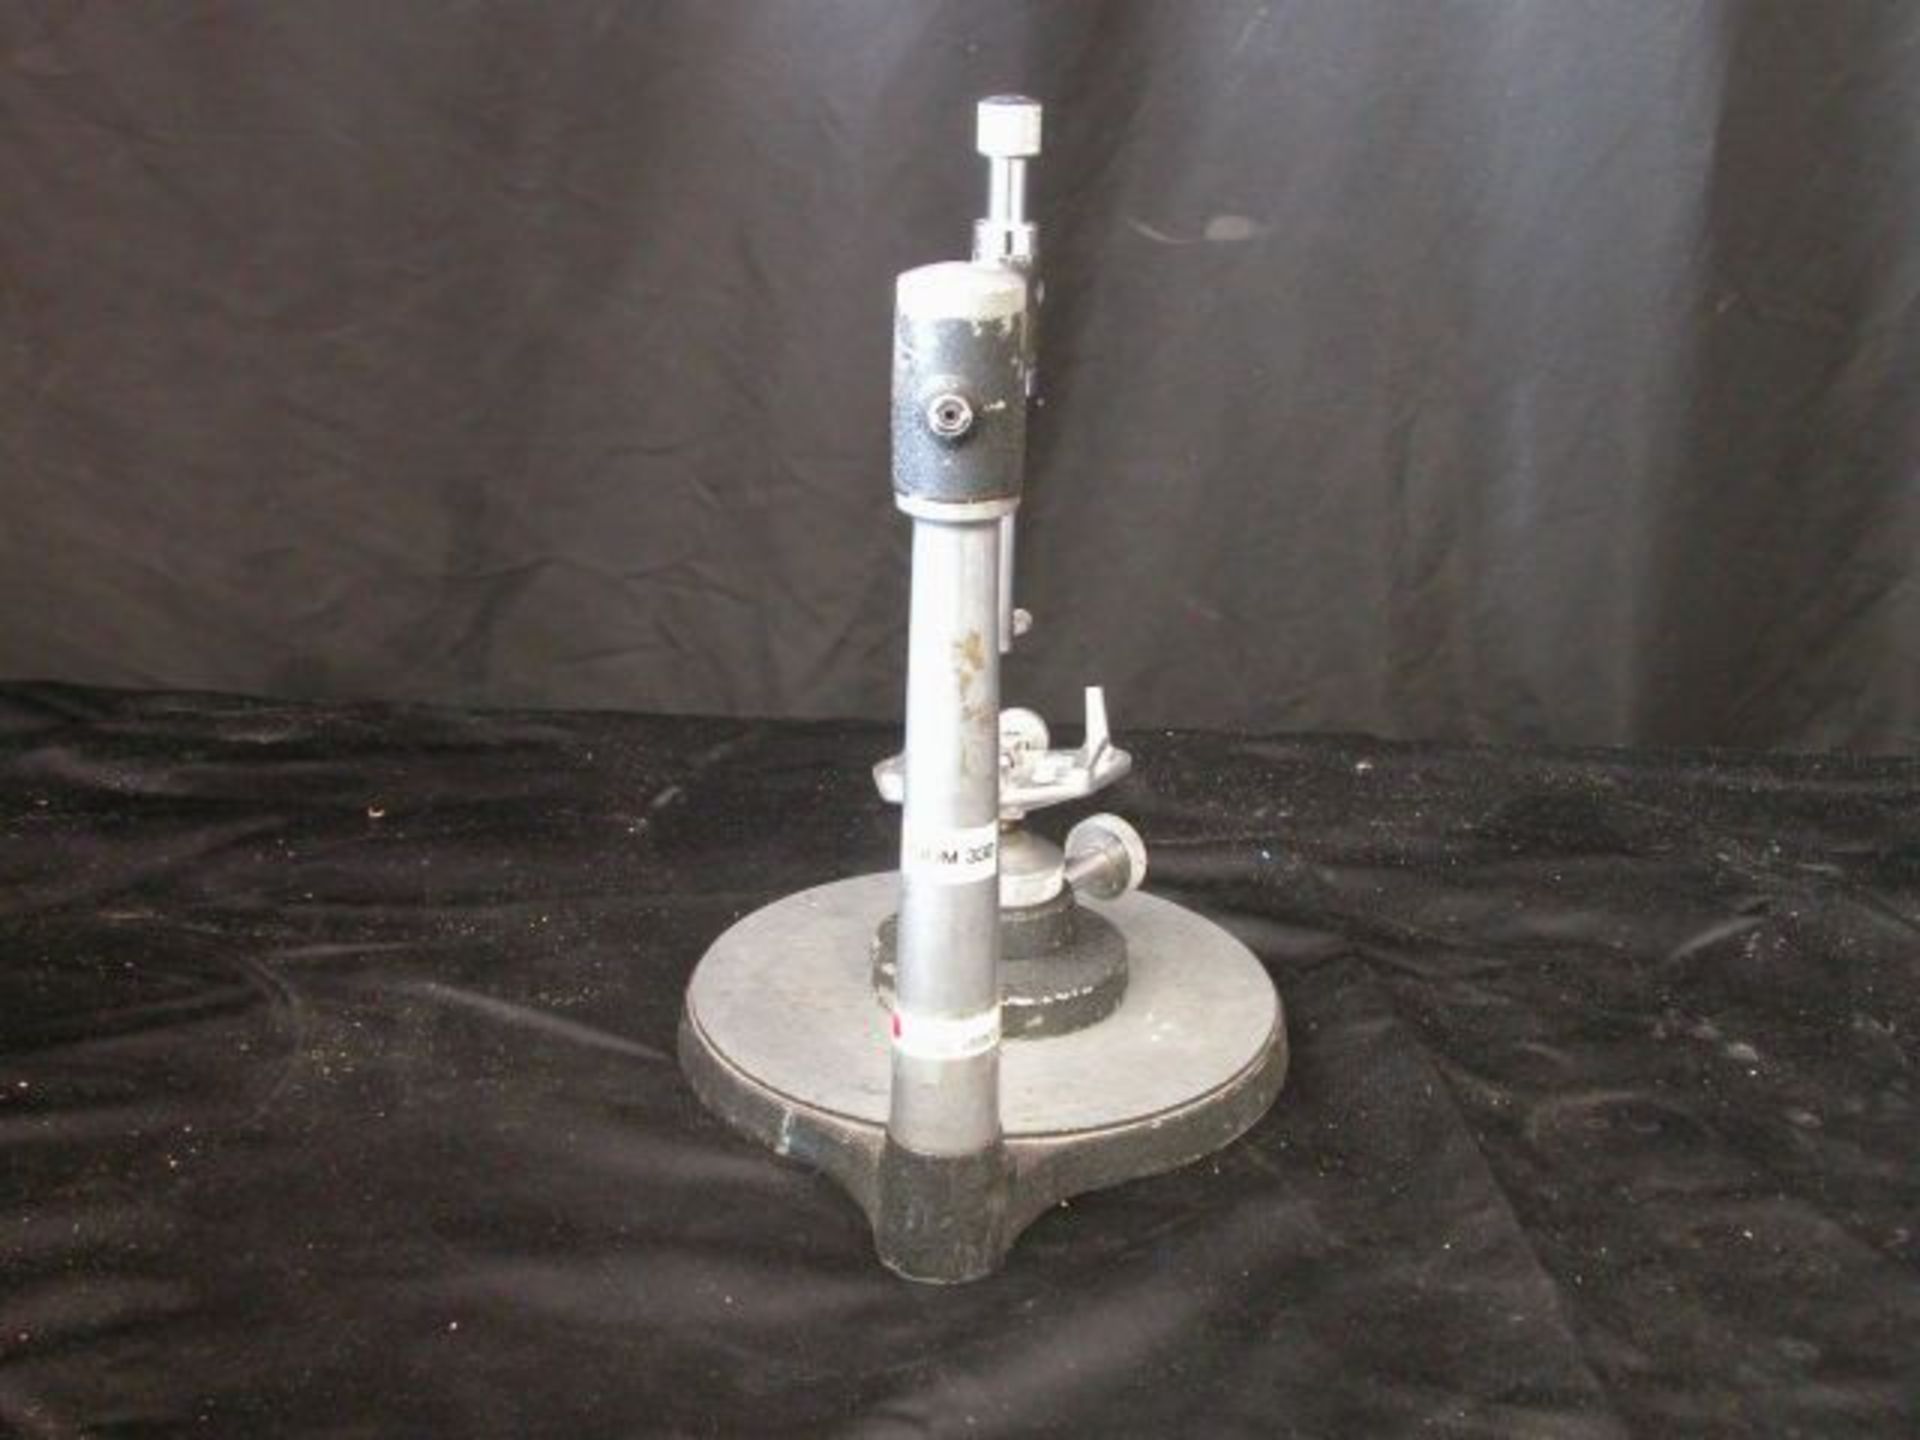 Ney Surveyor Dental Lab With Table, Qty 6, 330889109998 - Image 4 of 4